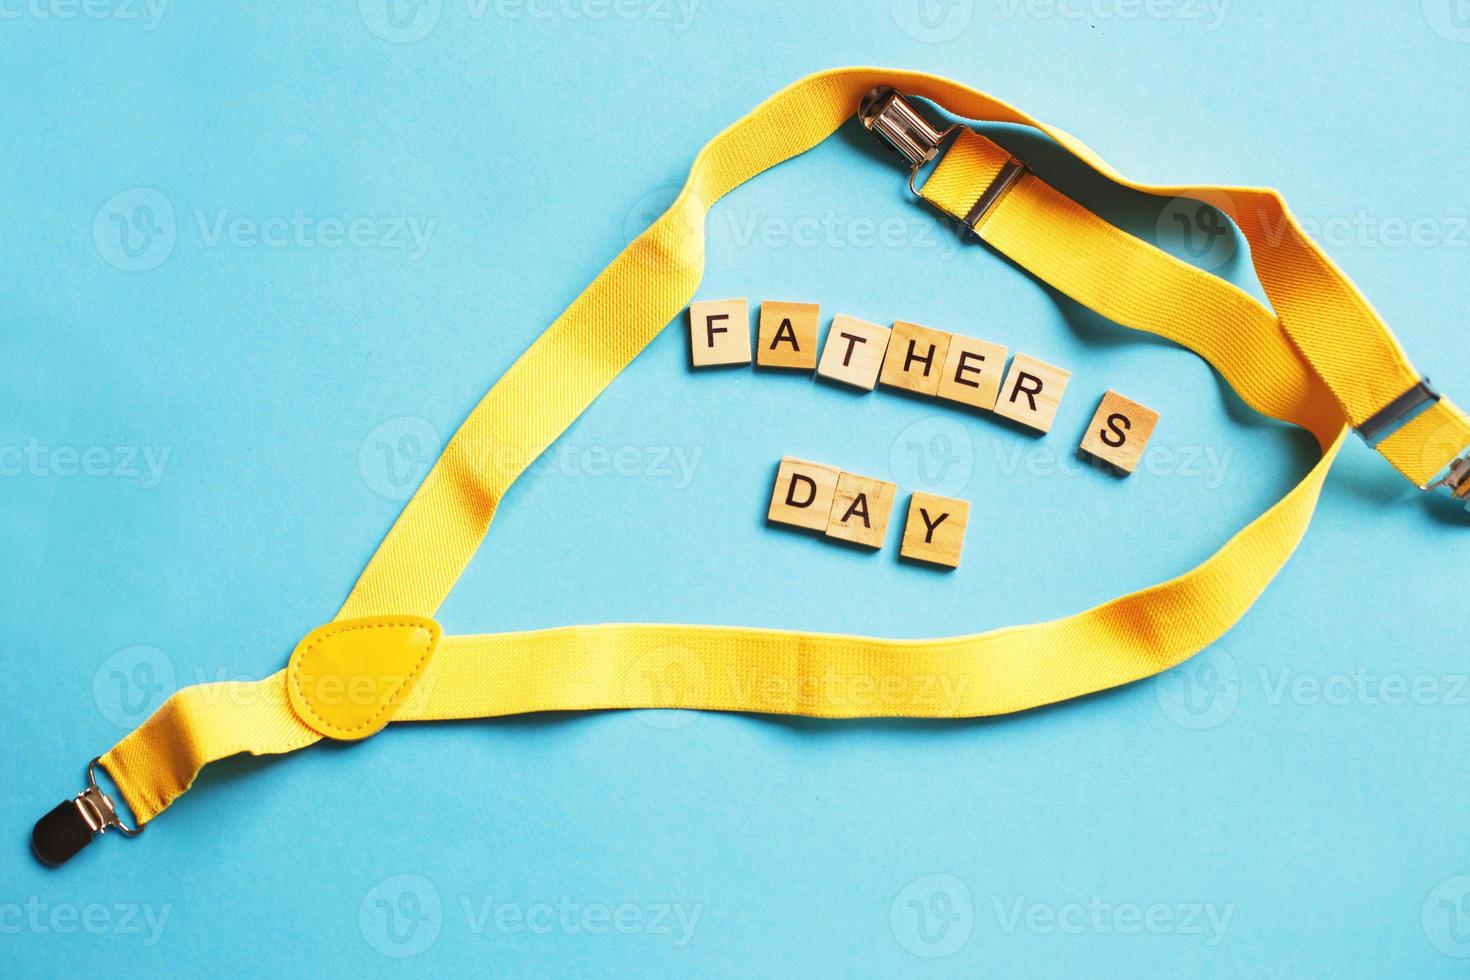 happy father's day lettering made by wooden cubes on a blue background with a yellow suspenders photo